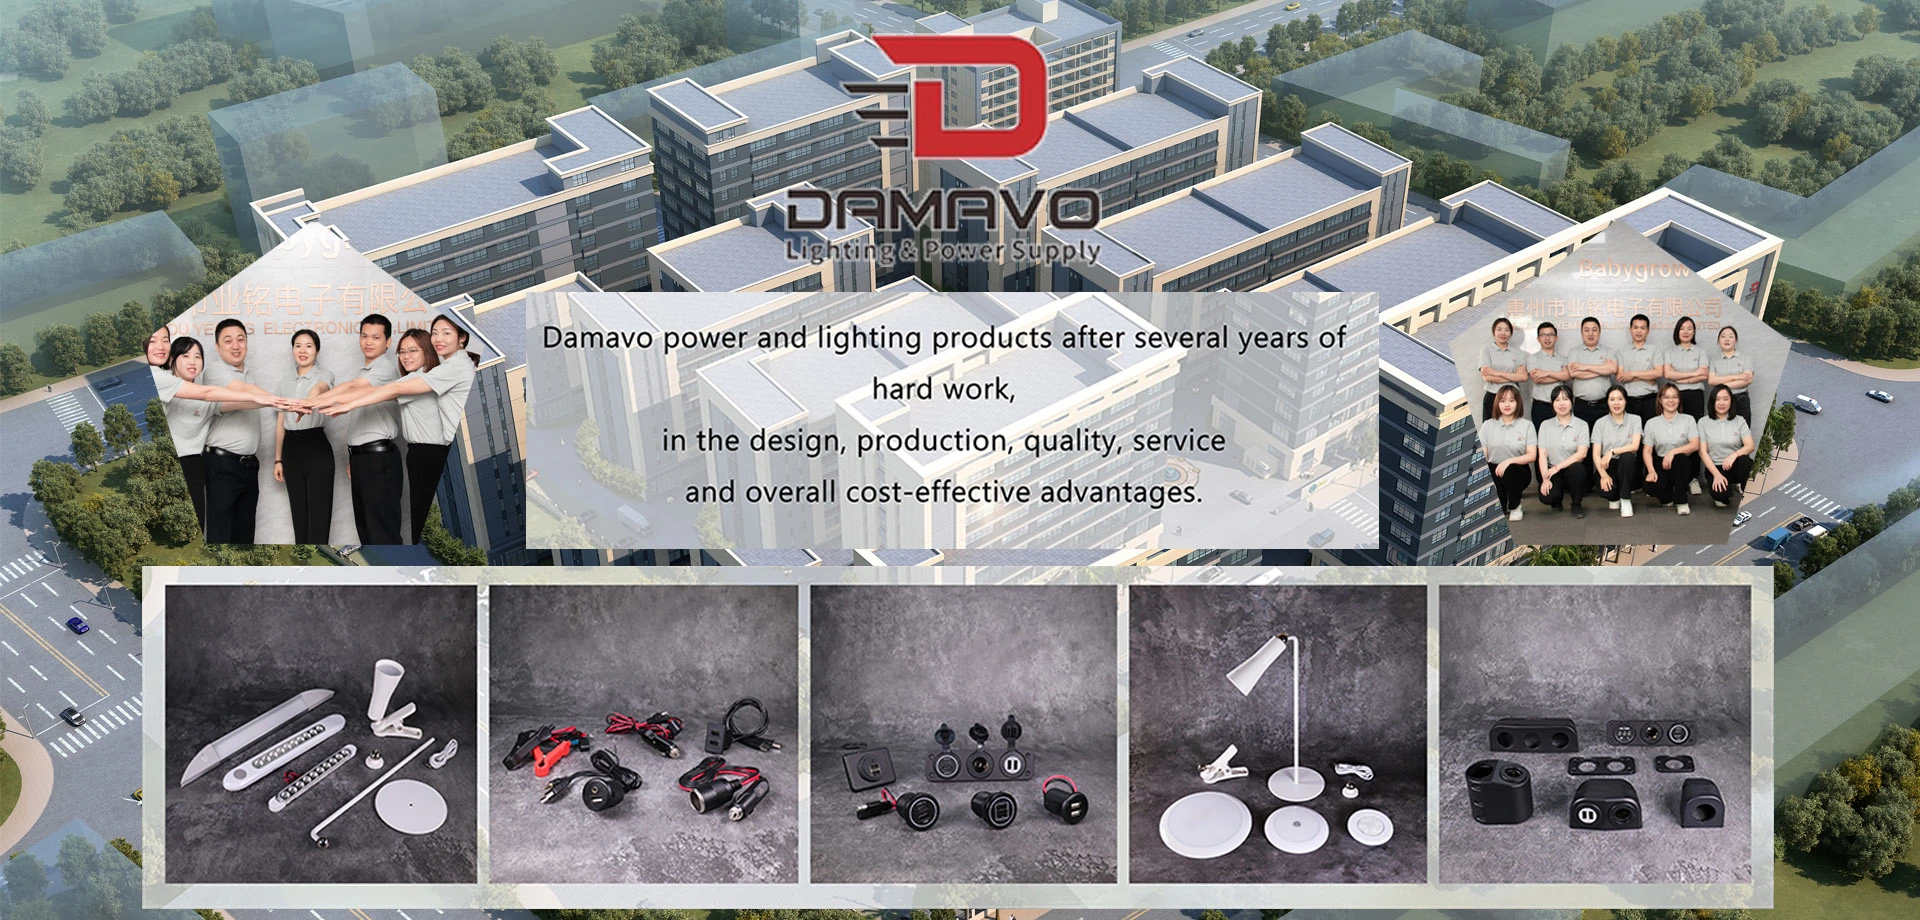 spiral extension lead, curly coiled mains cable, coiled power wire factory - DAMAVO